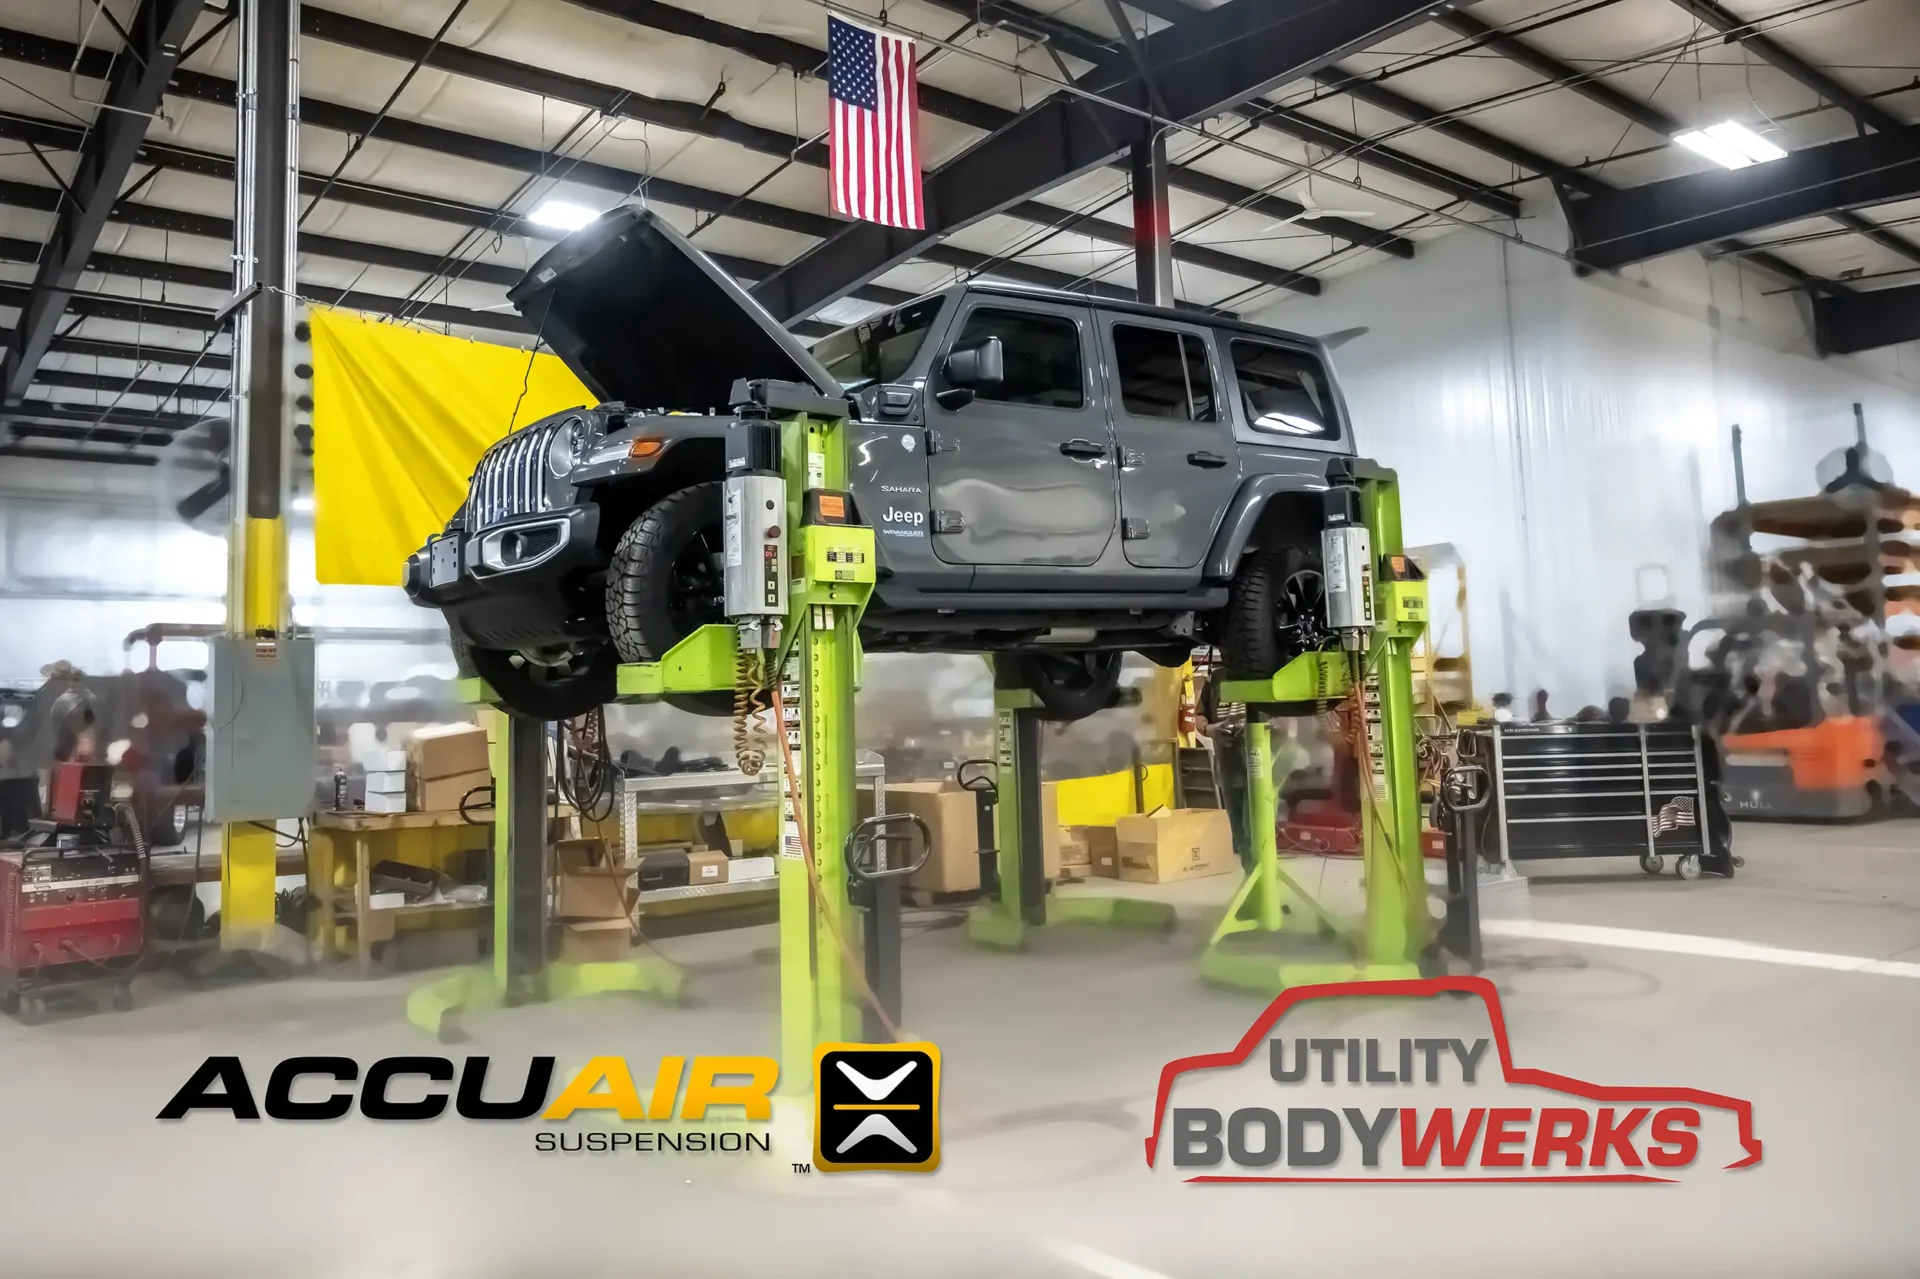 A Jeep getting an Accuair air suspension upgrade at Utility Bodywerks in Elkhart Indiana.